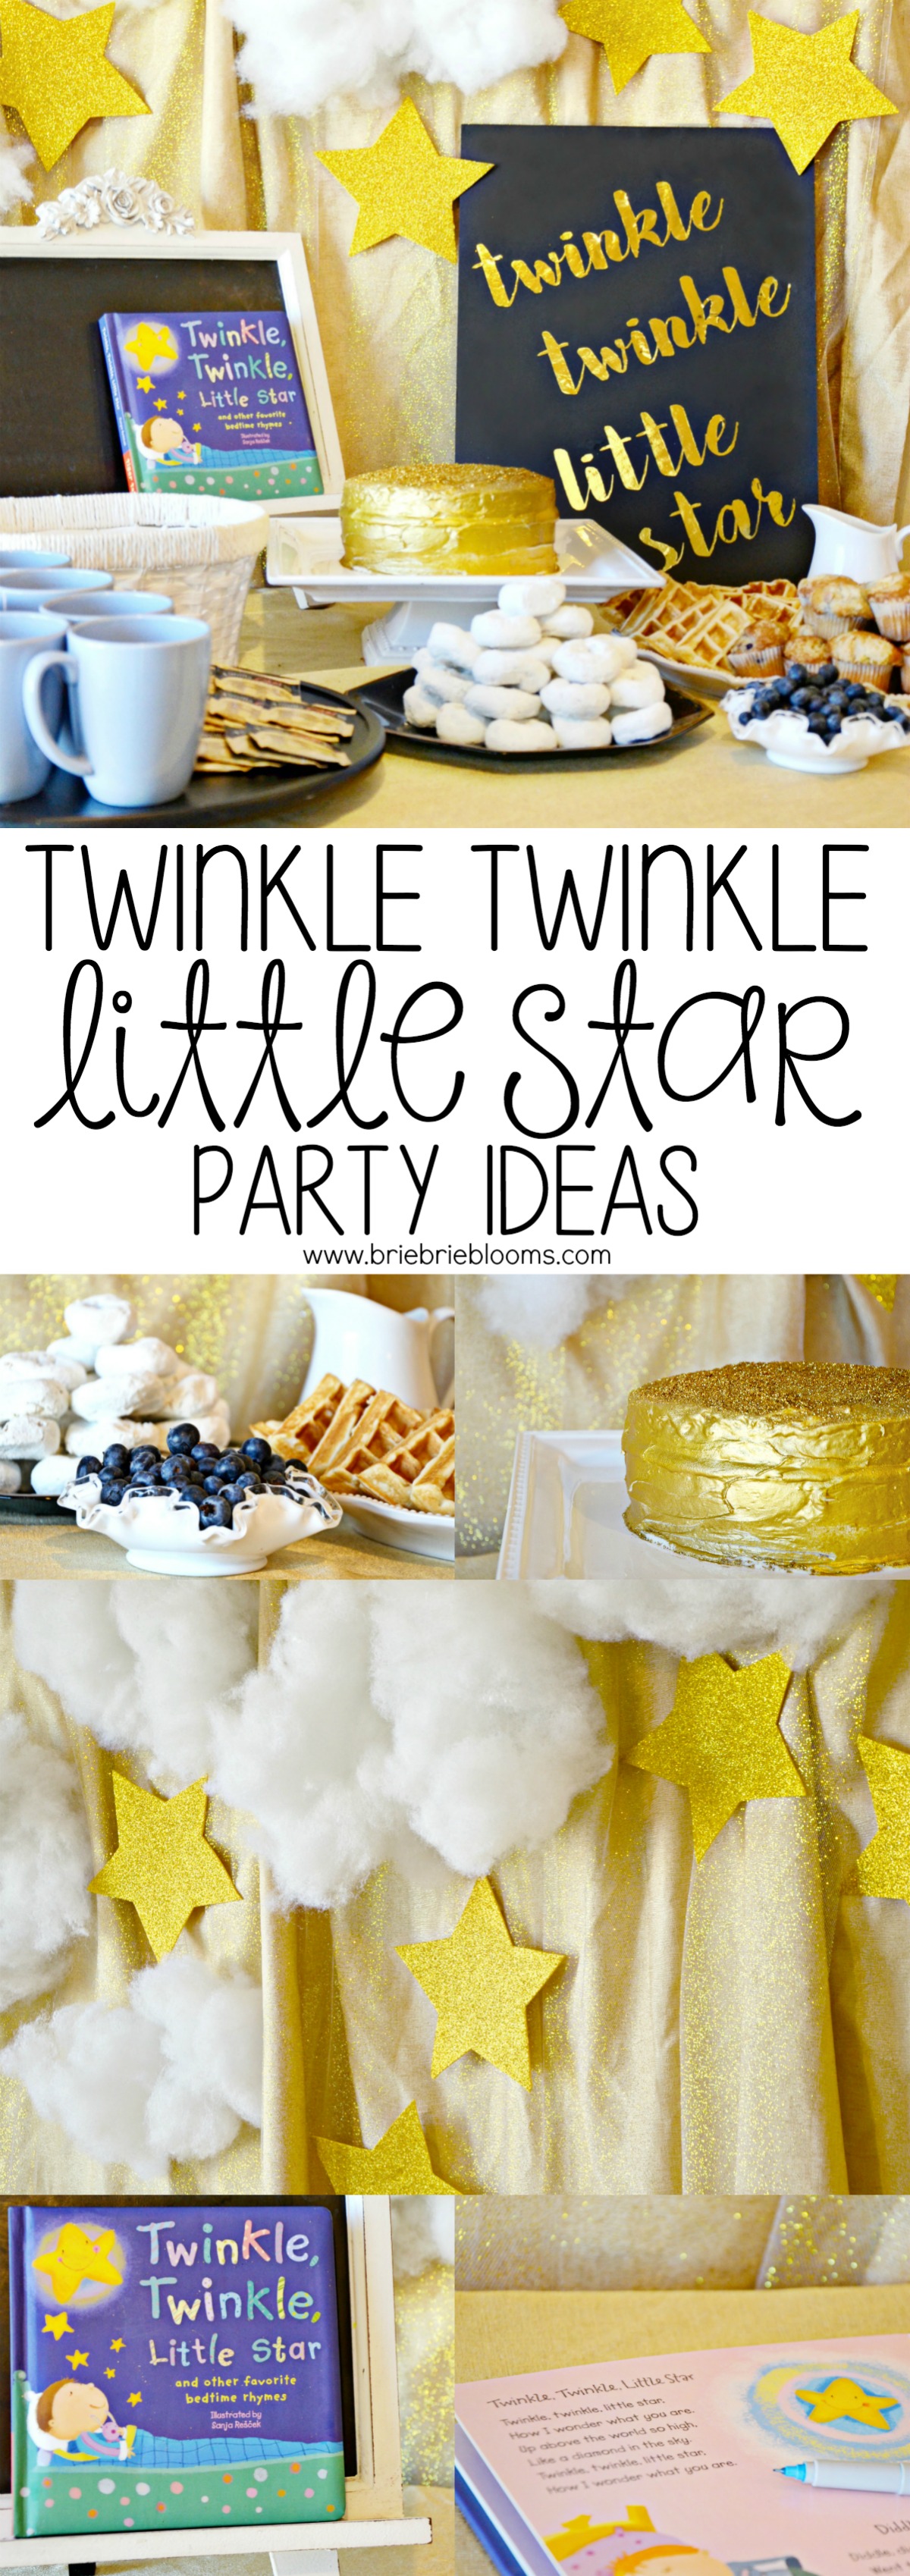 These twinkle twinkle little star party ideas are great for baby showers and first birthdays!